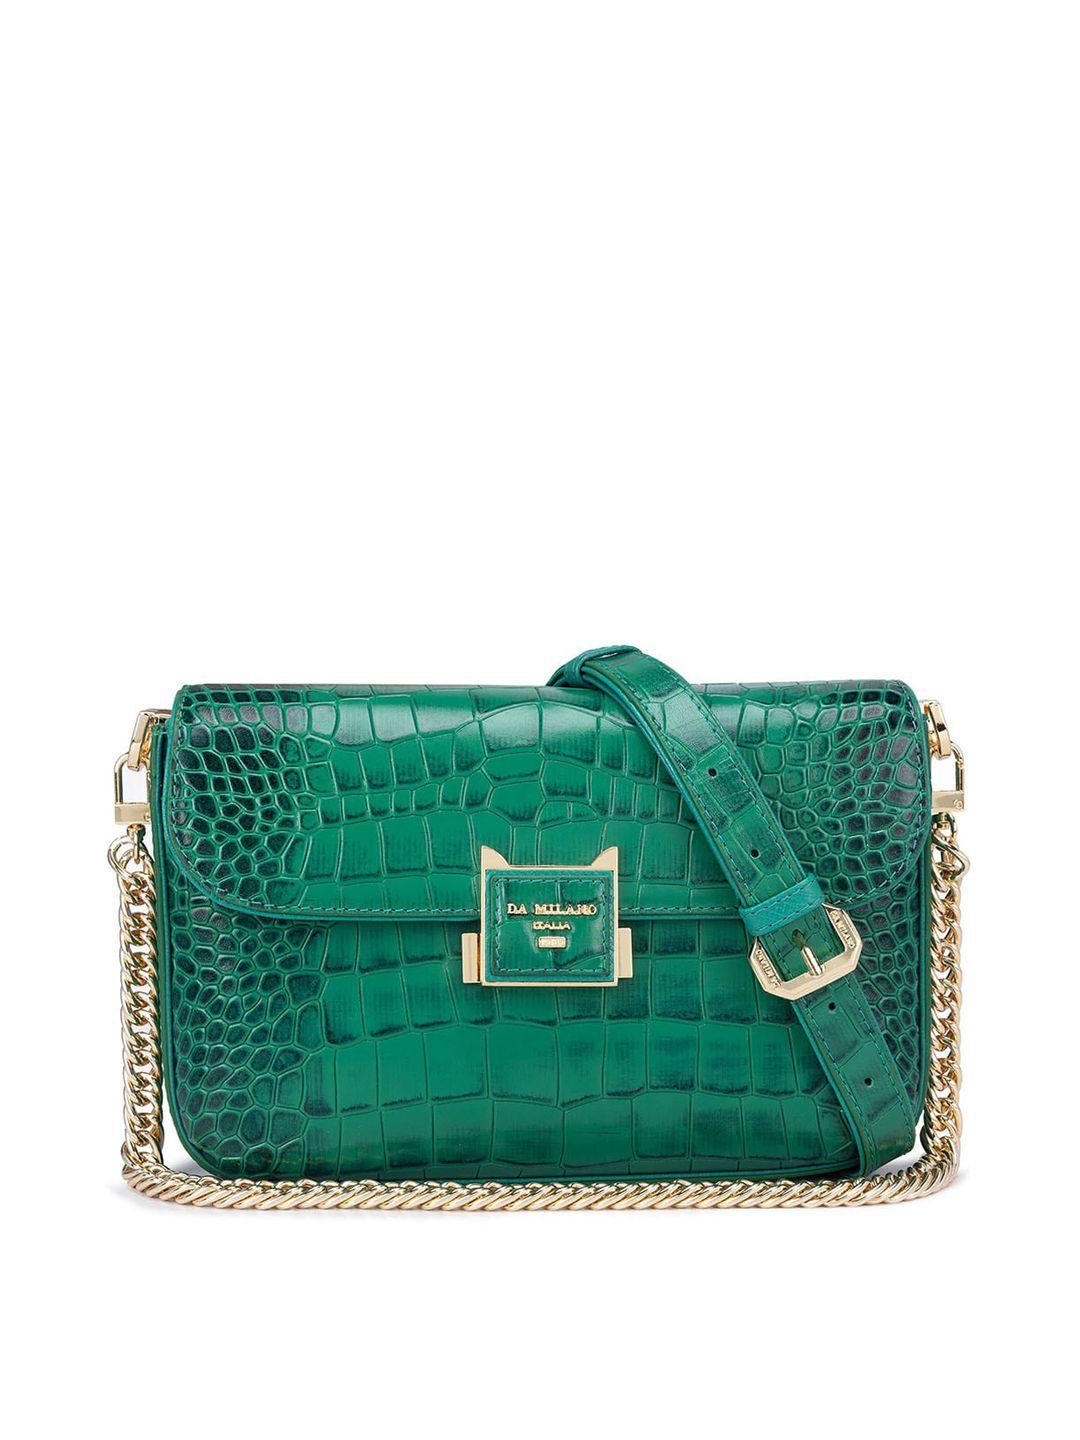 da milano green textured leather structured sling bag